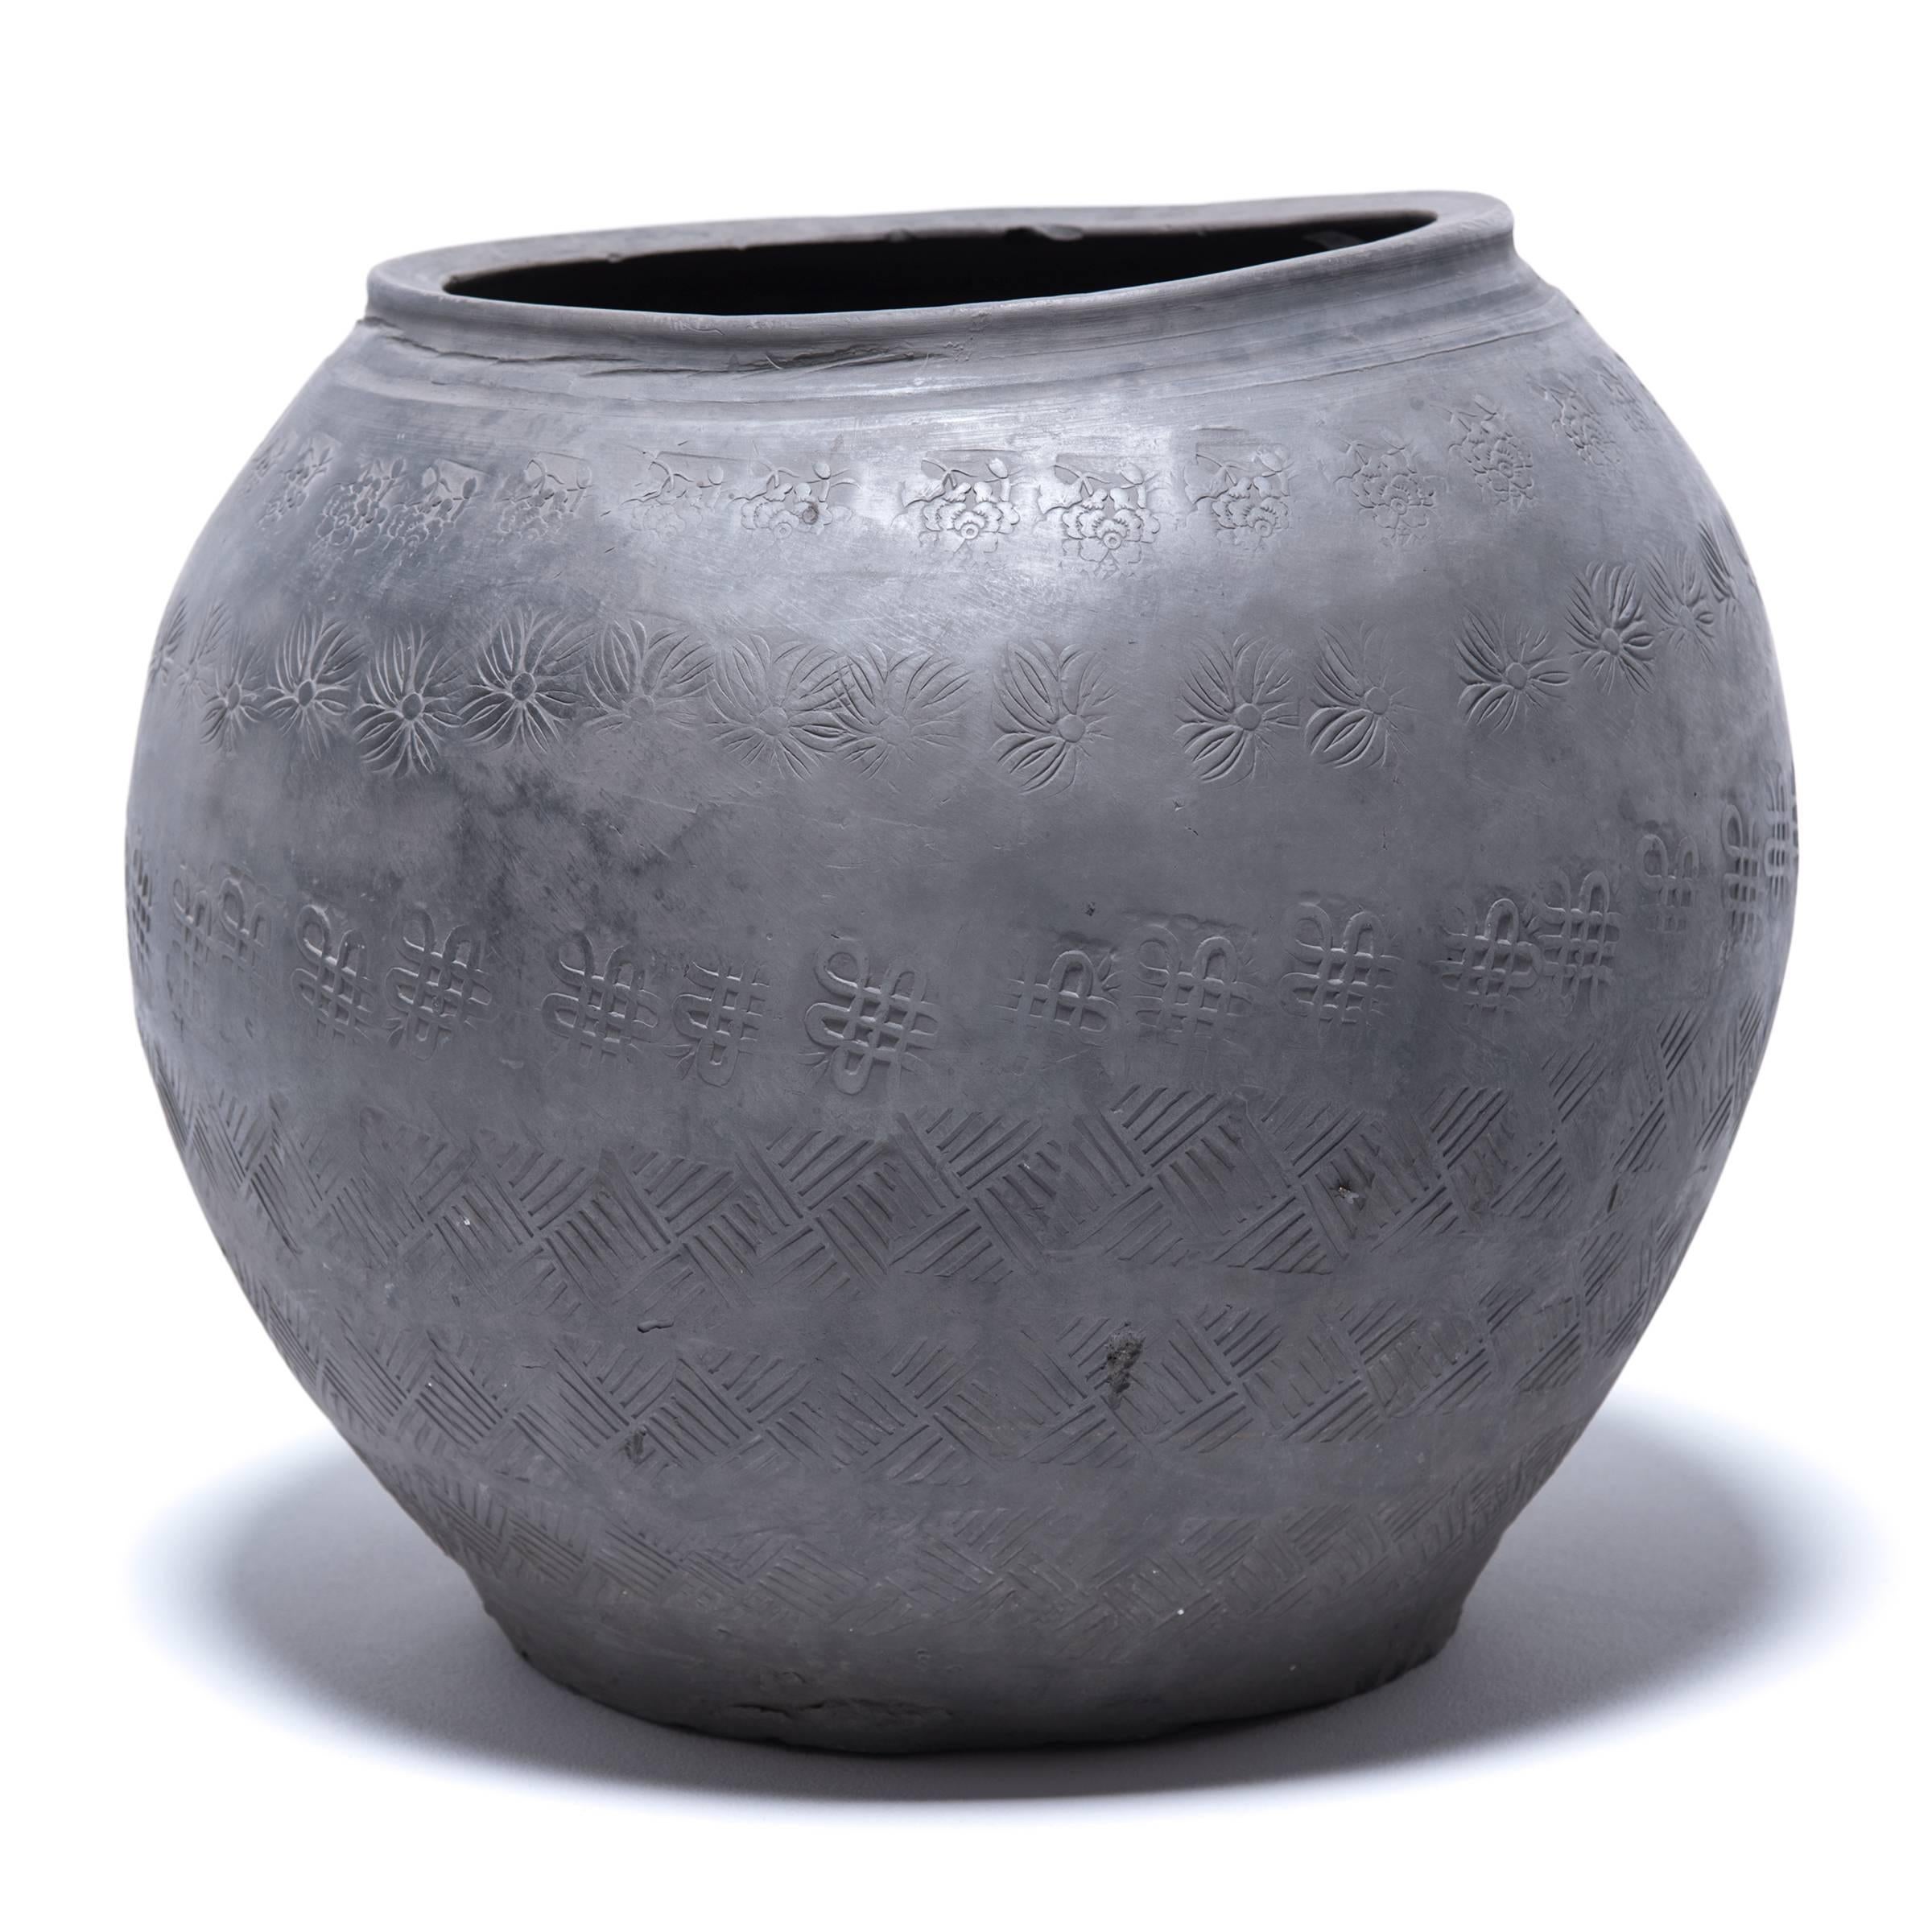 Over a century ago, a gifted potter from northern China crafted this organic feeling clay jar out of rich, dark river clay mined from the river basins of Asia. The surface is stamped with auspicious symbols: The Tibetan Buddhist endless knot, and